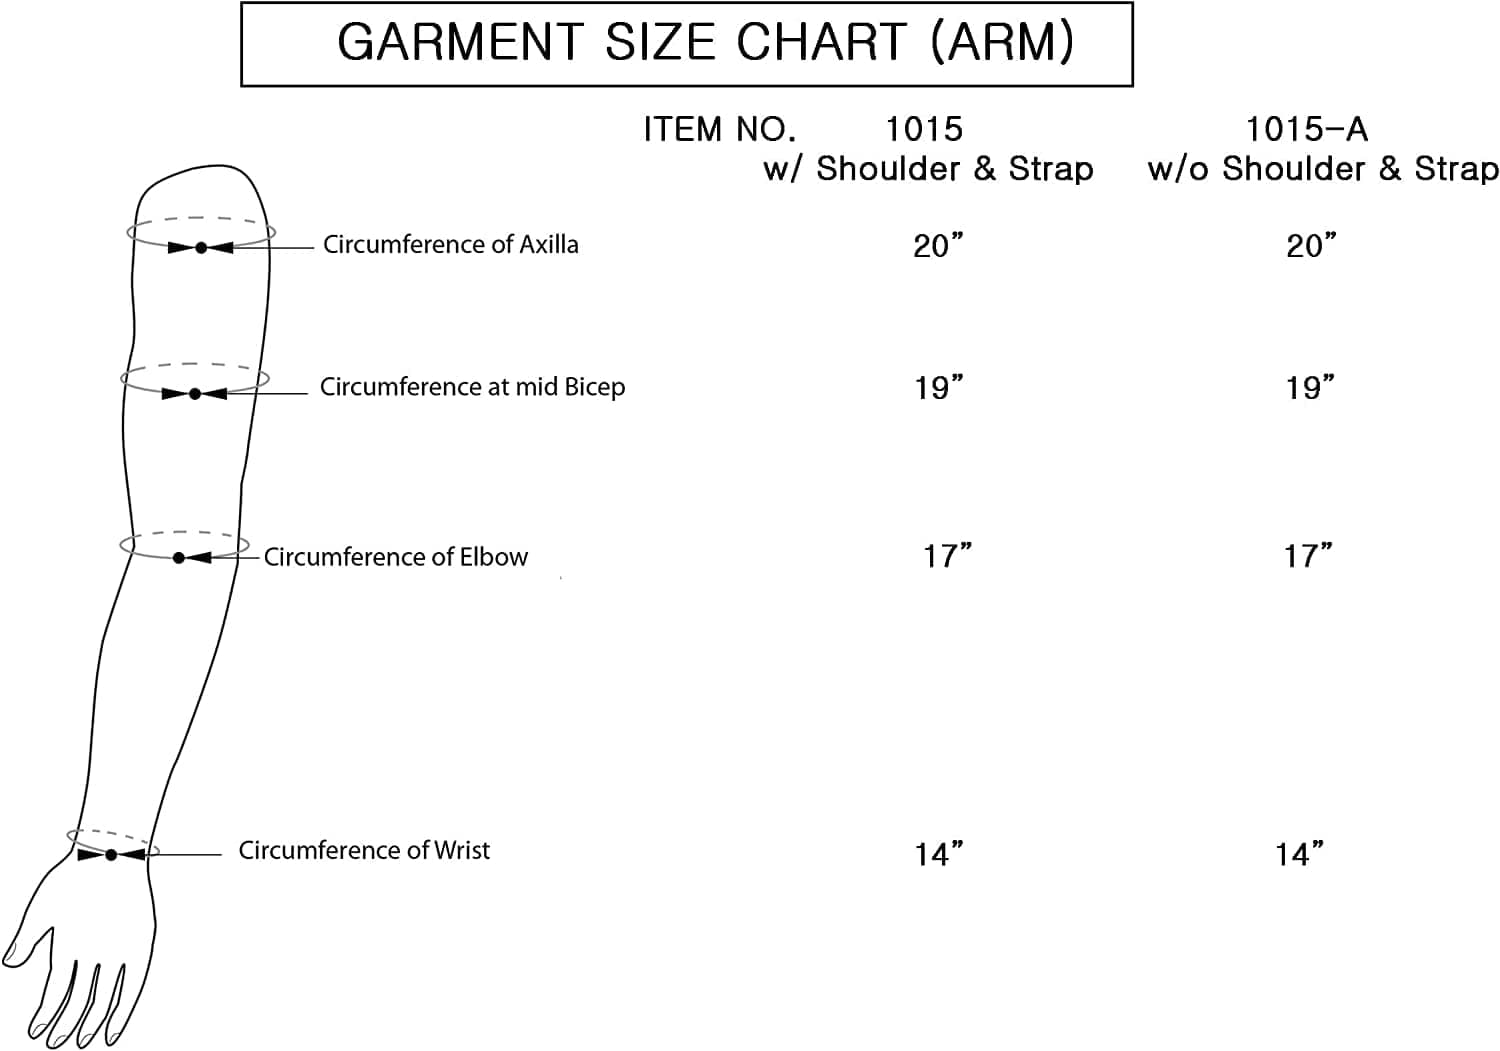 AIR1000 Compression Garment Neomedic Garments Only (No Machine Included) (Waist Garment (X-Large 42-49”),)